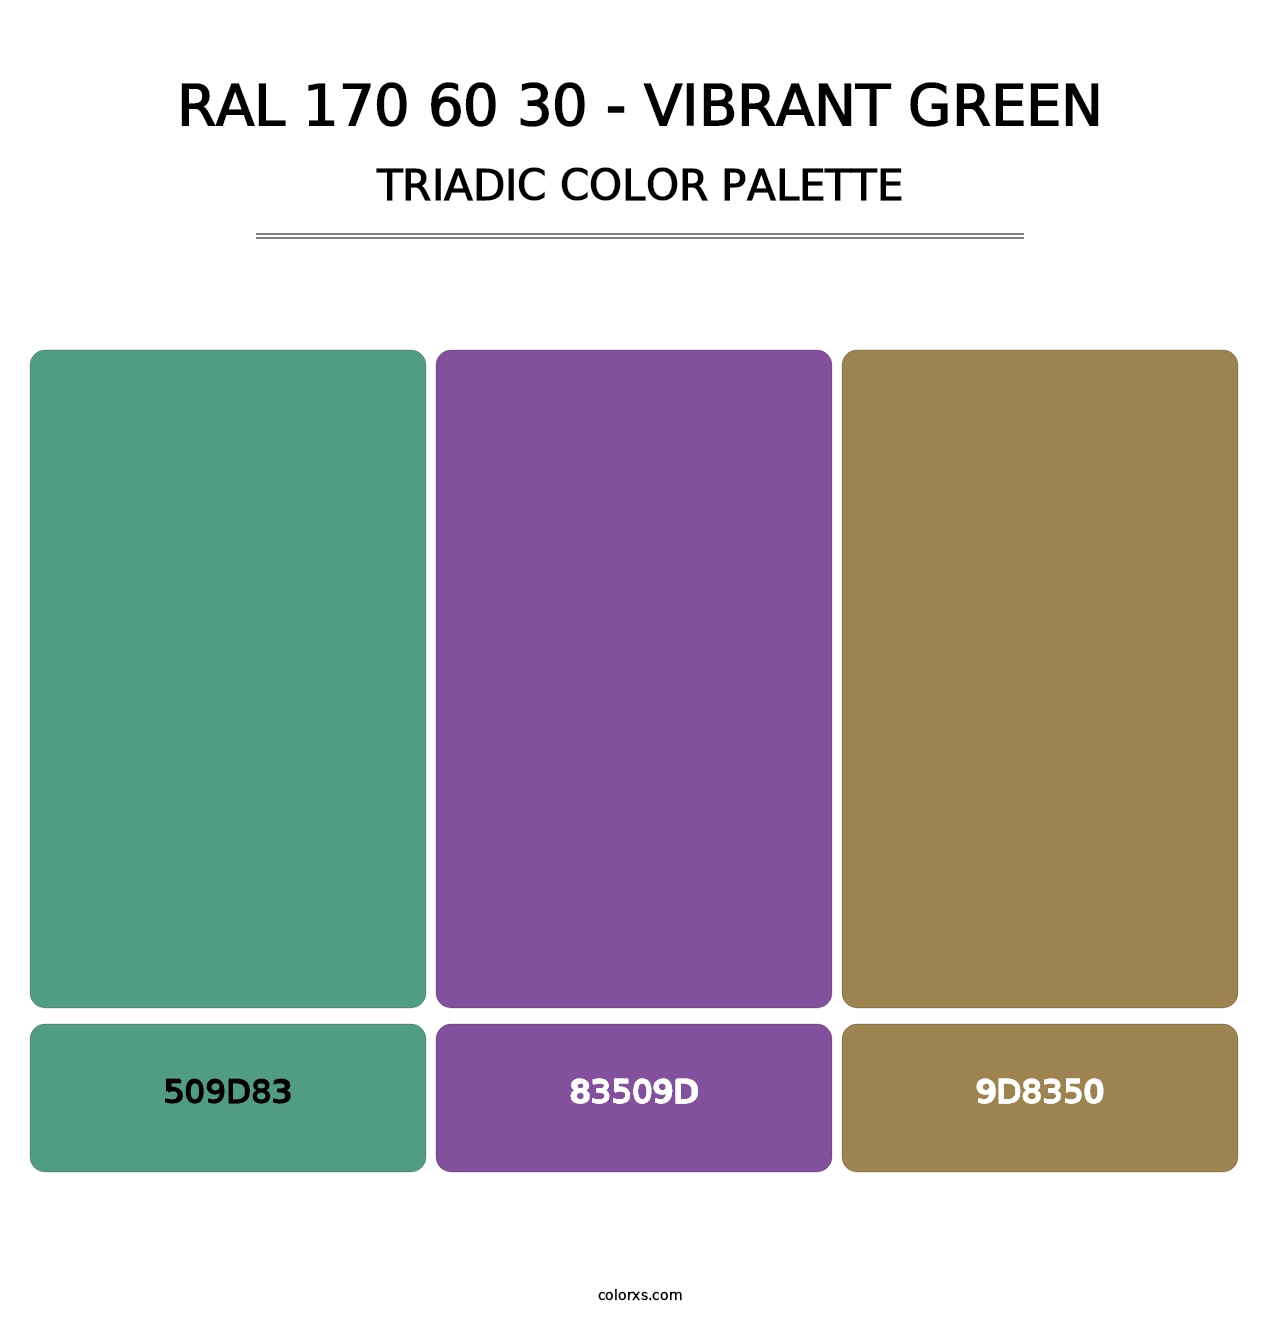 RAL 170 60 30 - Vibrant Green - Triadic Color Palette